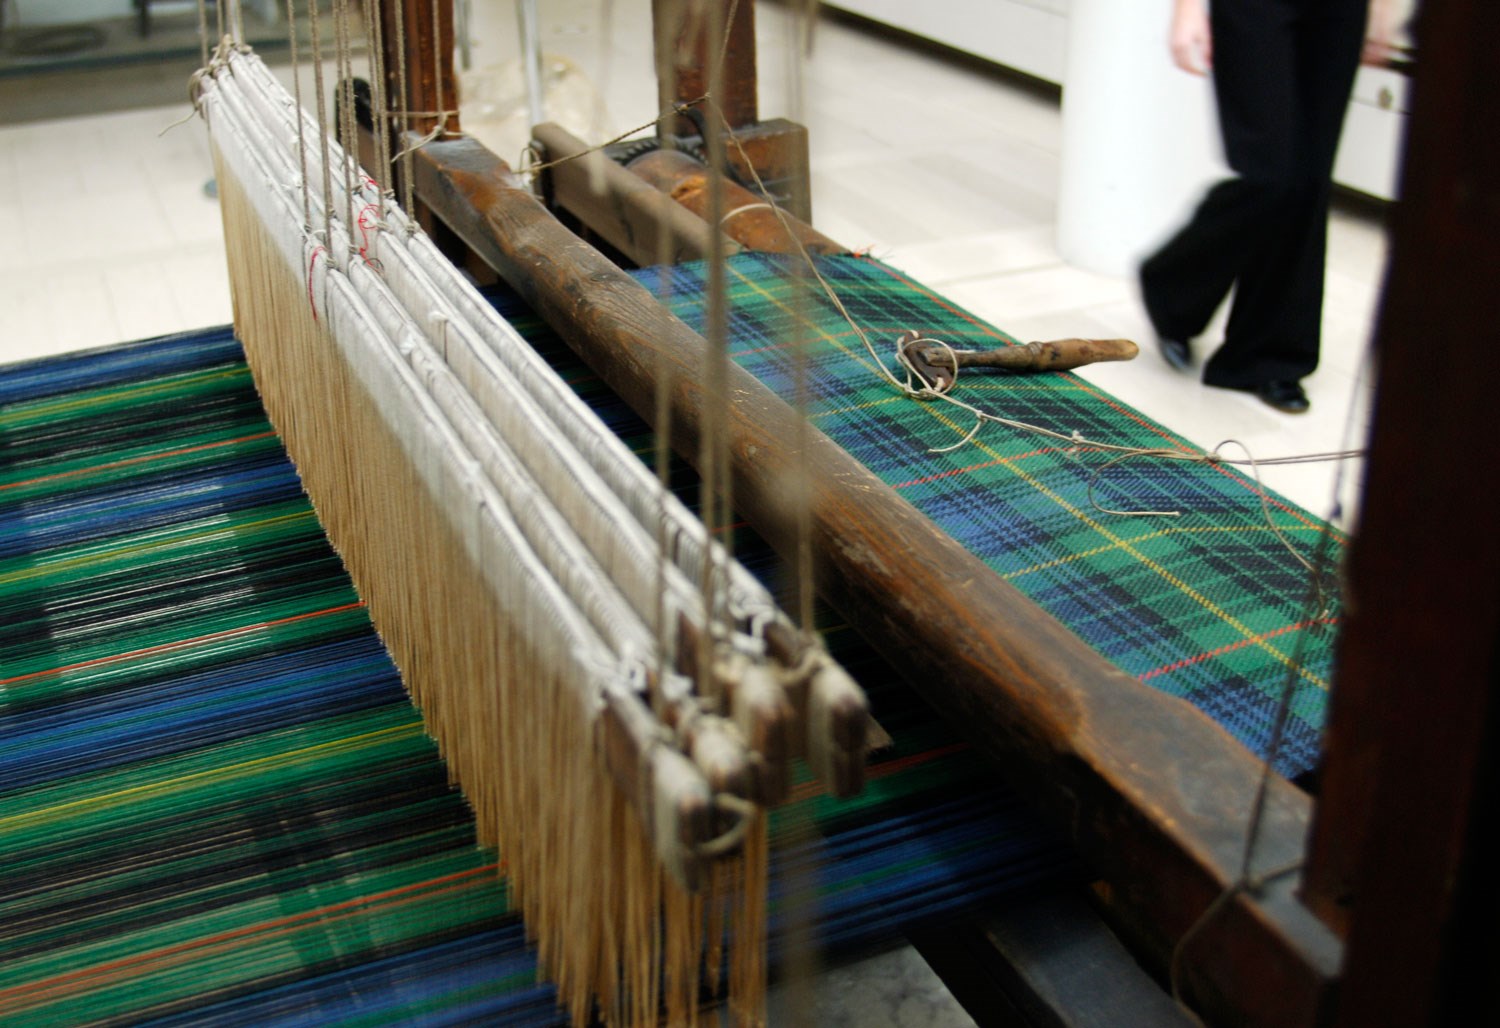 Loom in the Scotland Transformed gallery